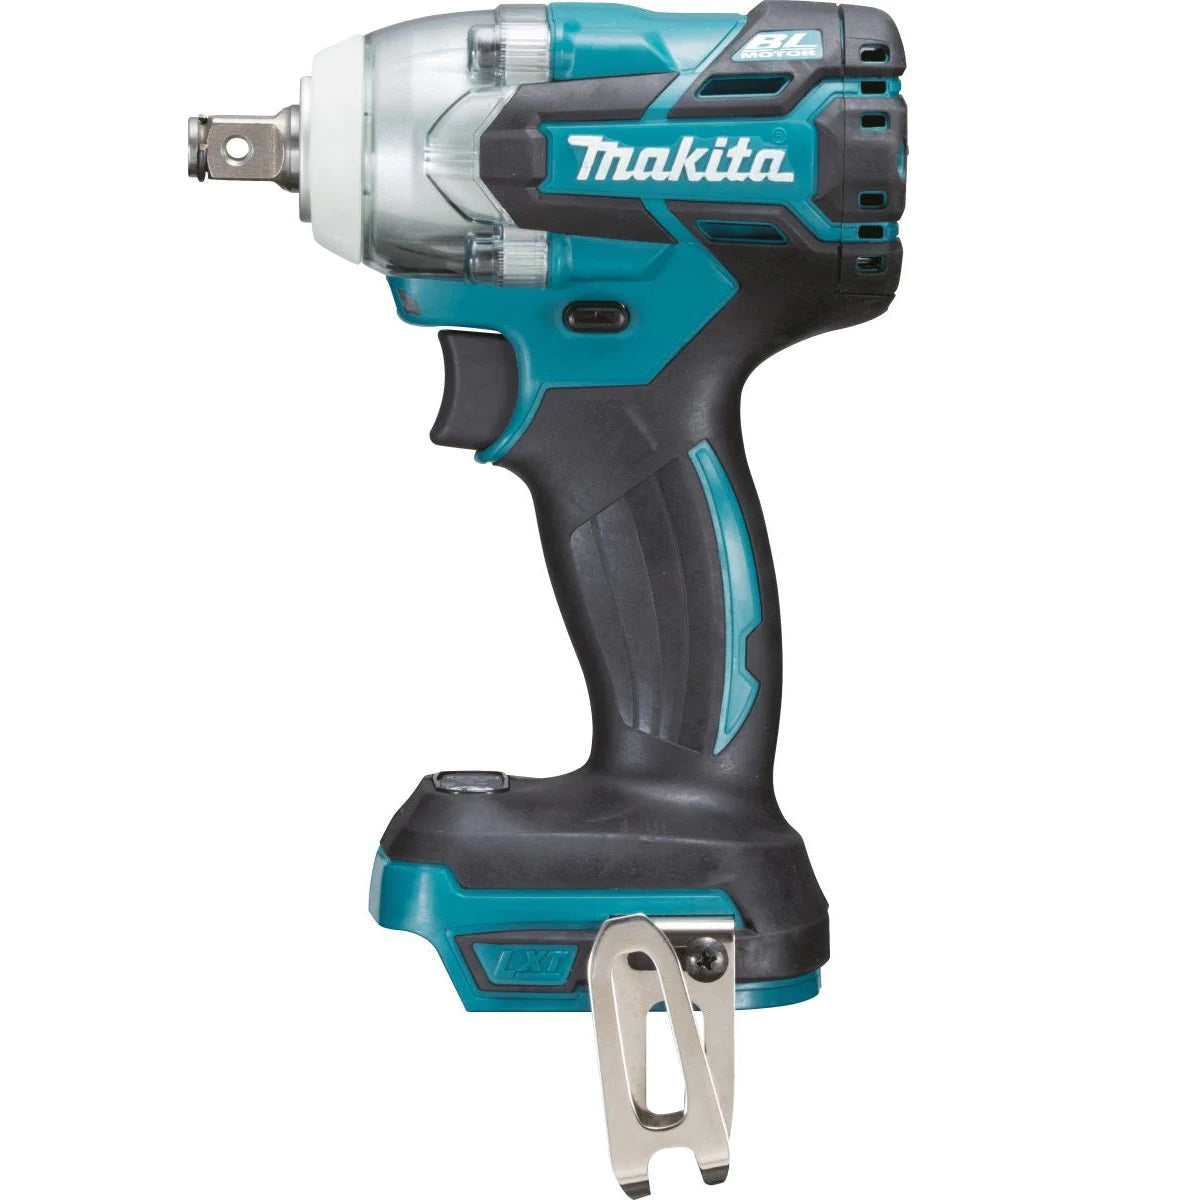 Makita DTW285Z 18v Brushless 1/2" Impact Wrench - Body Only